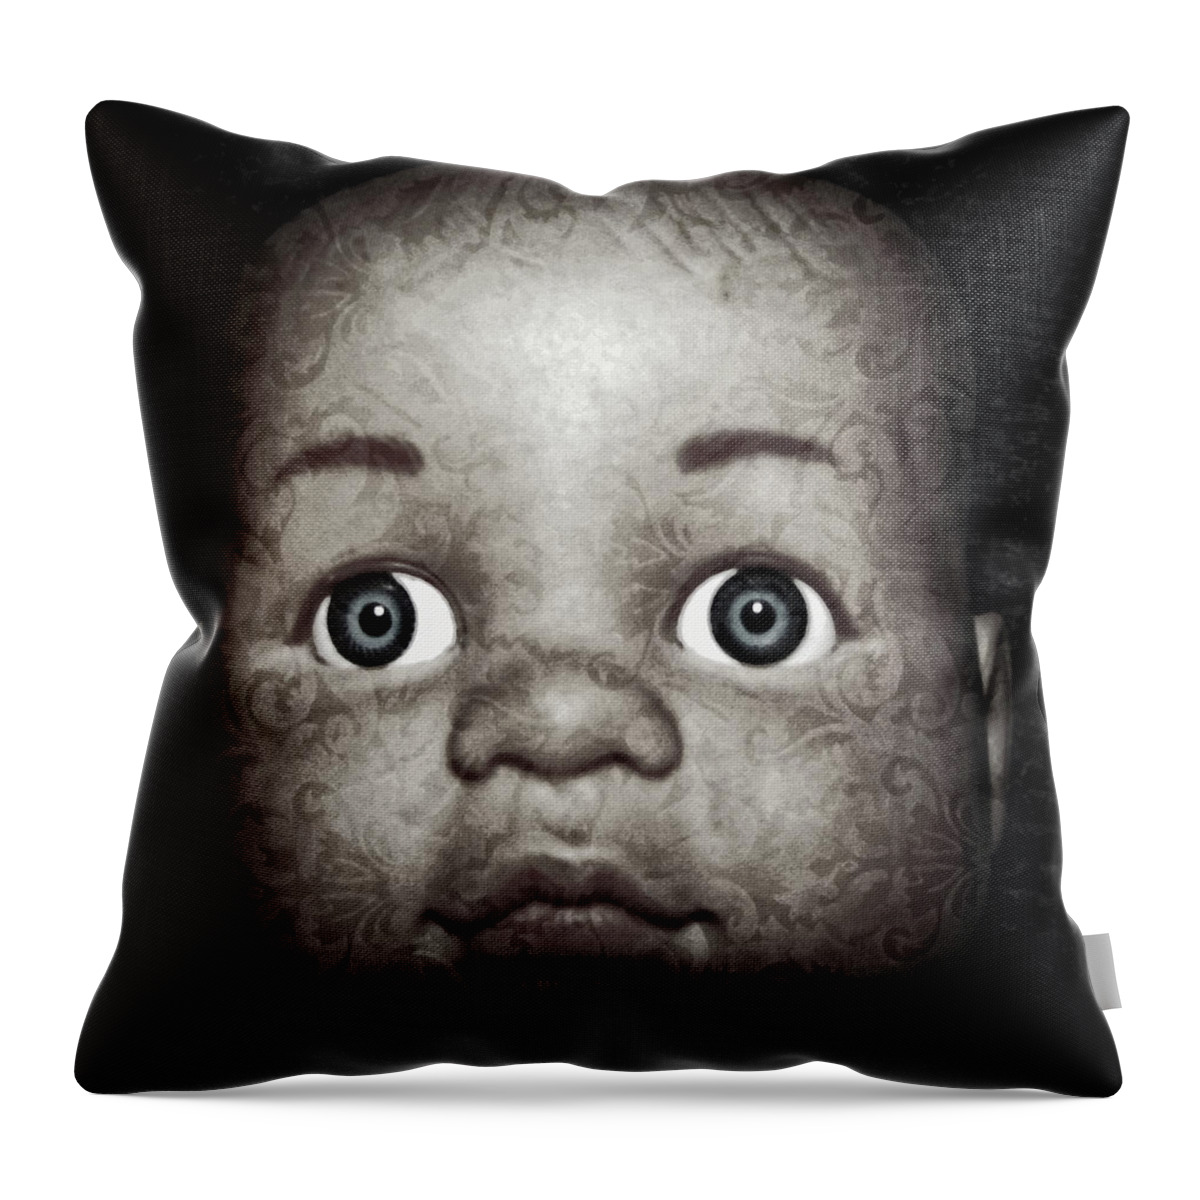 Black And White Throw Pillow featuring the photograph Brocade Doll's Head by Tikvah's Hope